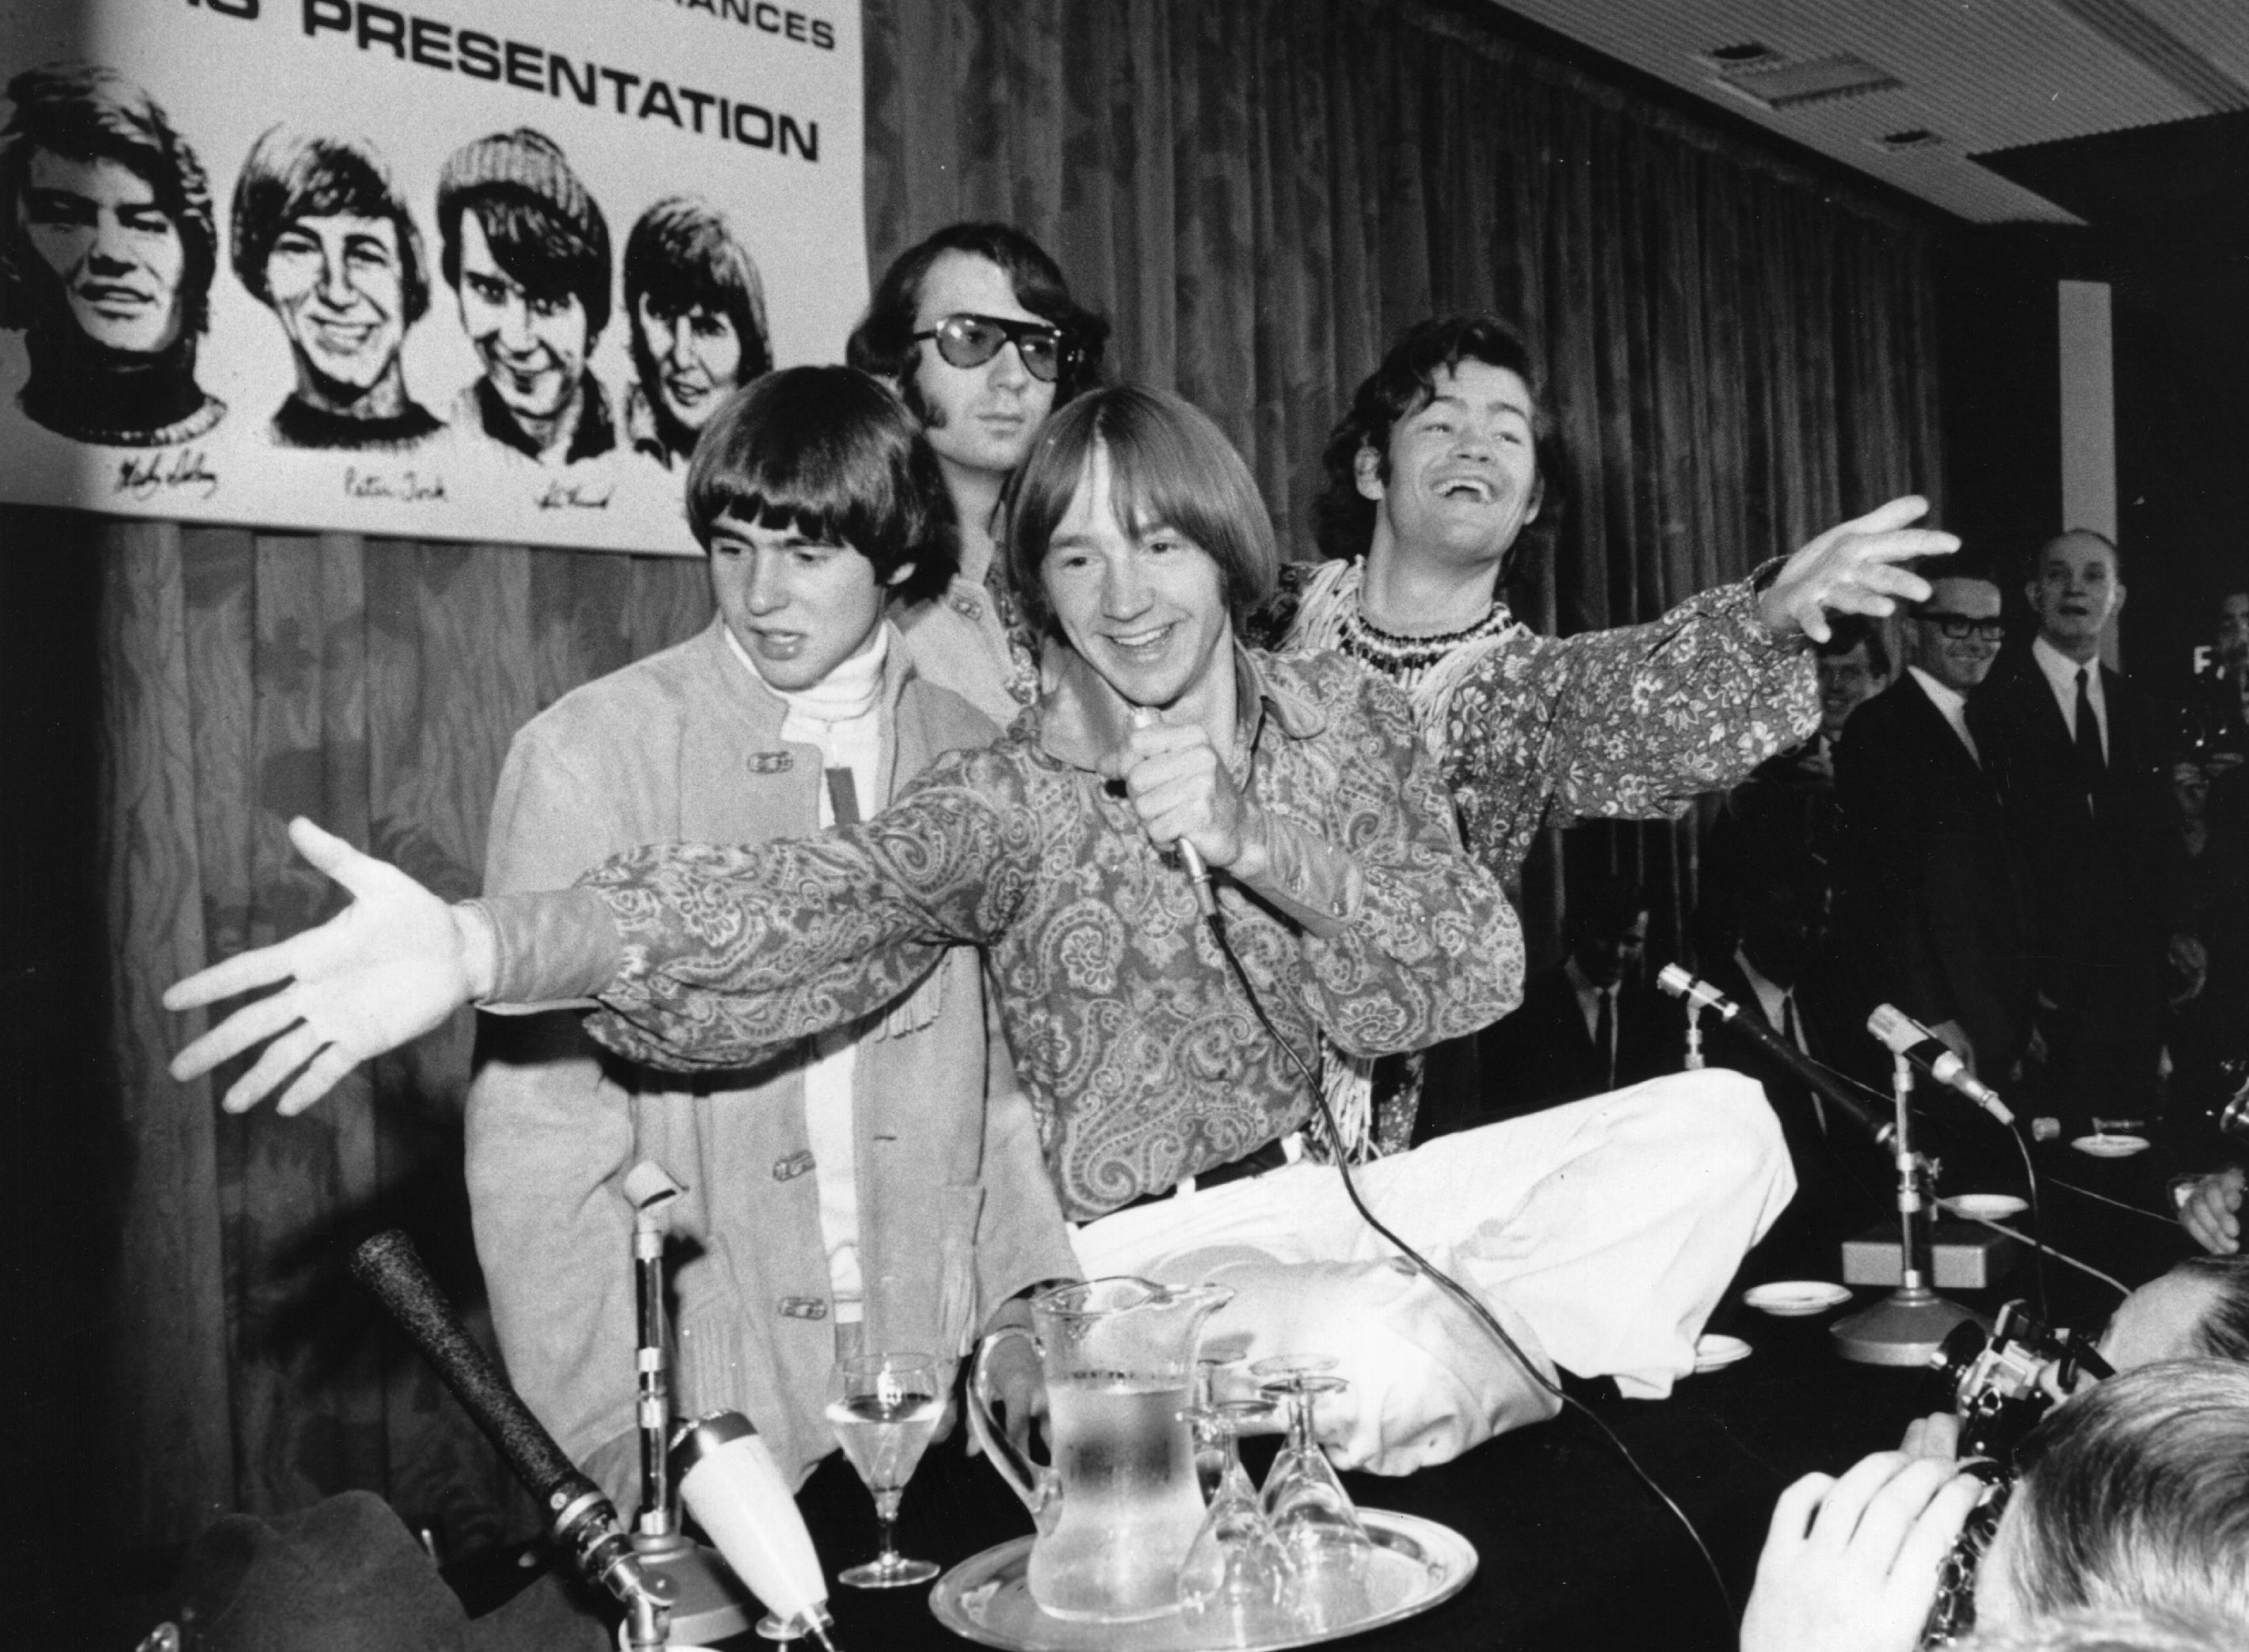 The Monkees' Davy Jones, Mike Nesmith, Peter Tork, and Davy Jones near a table